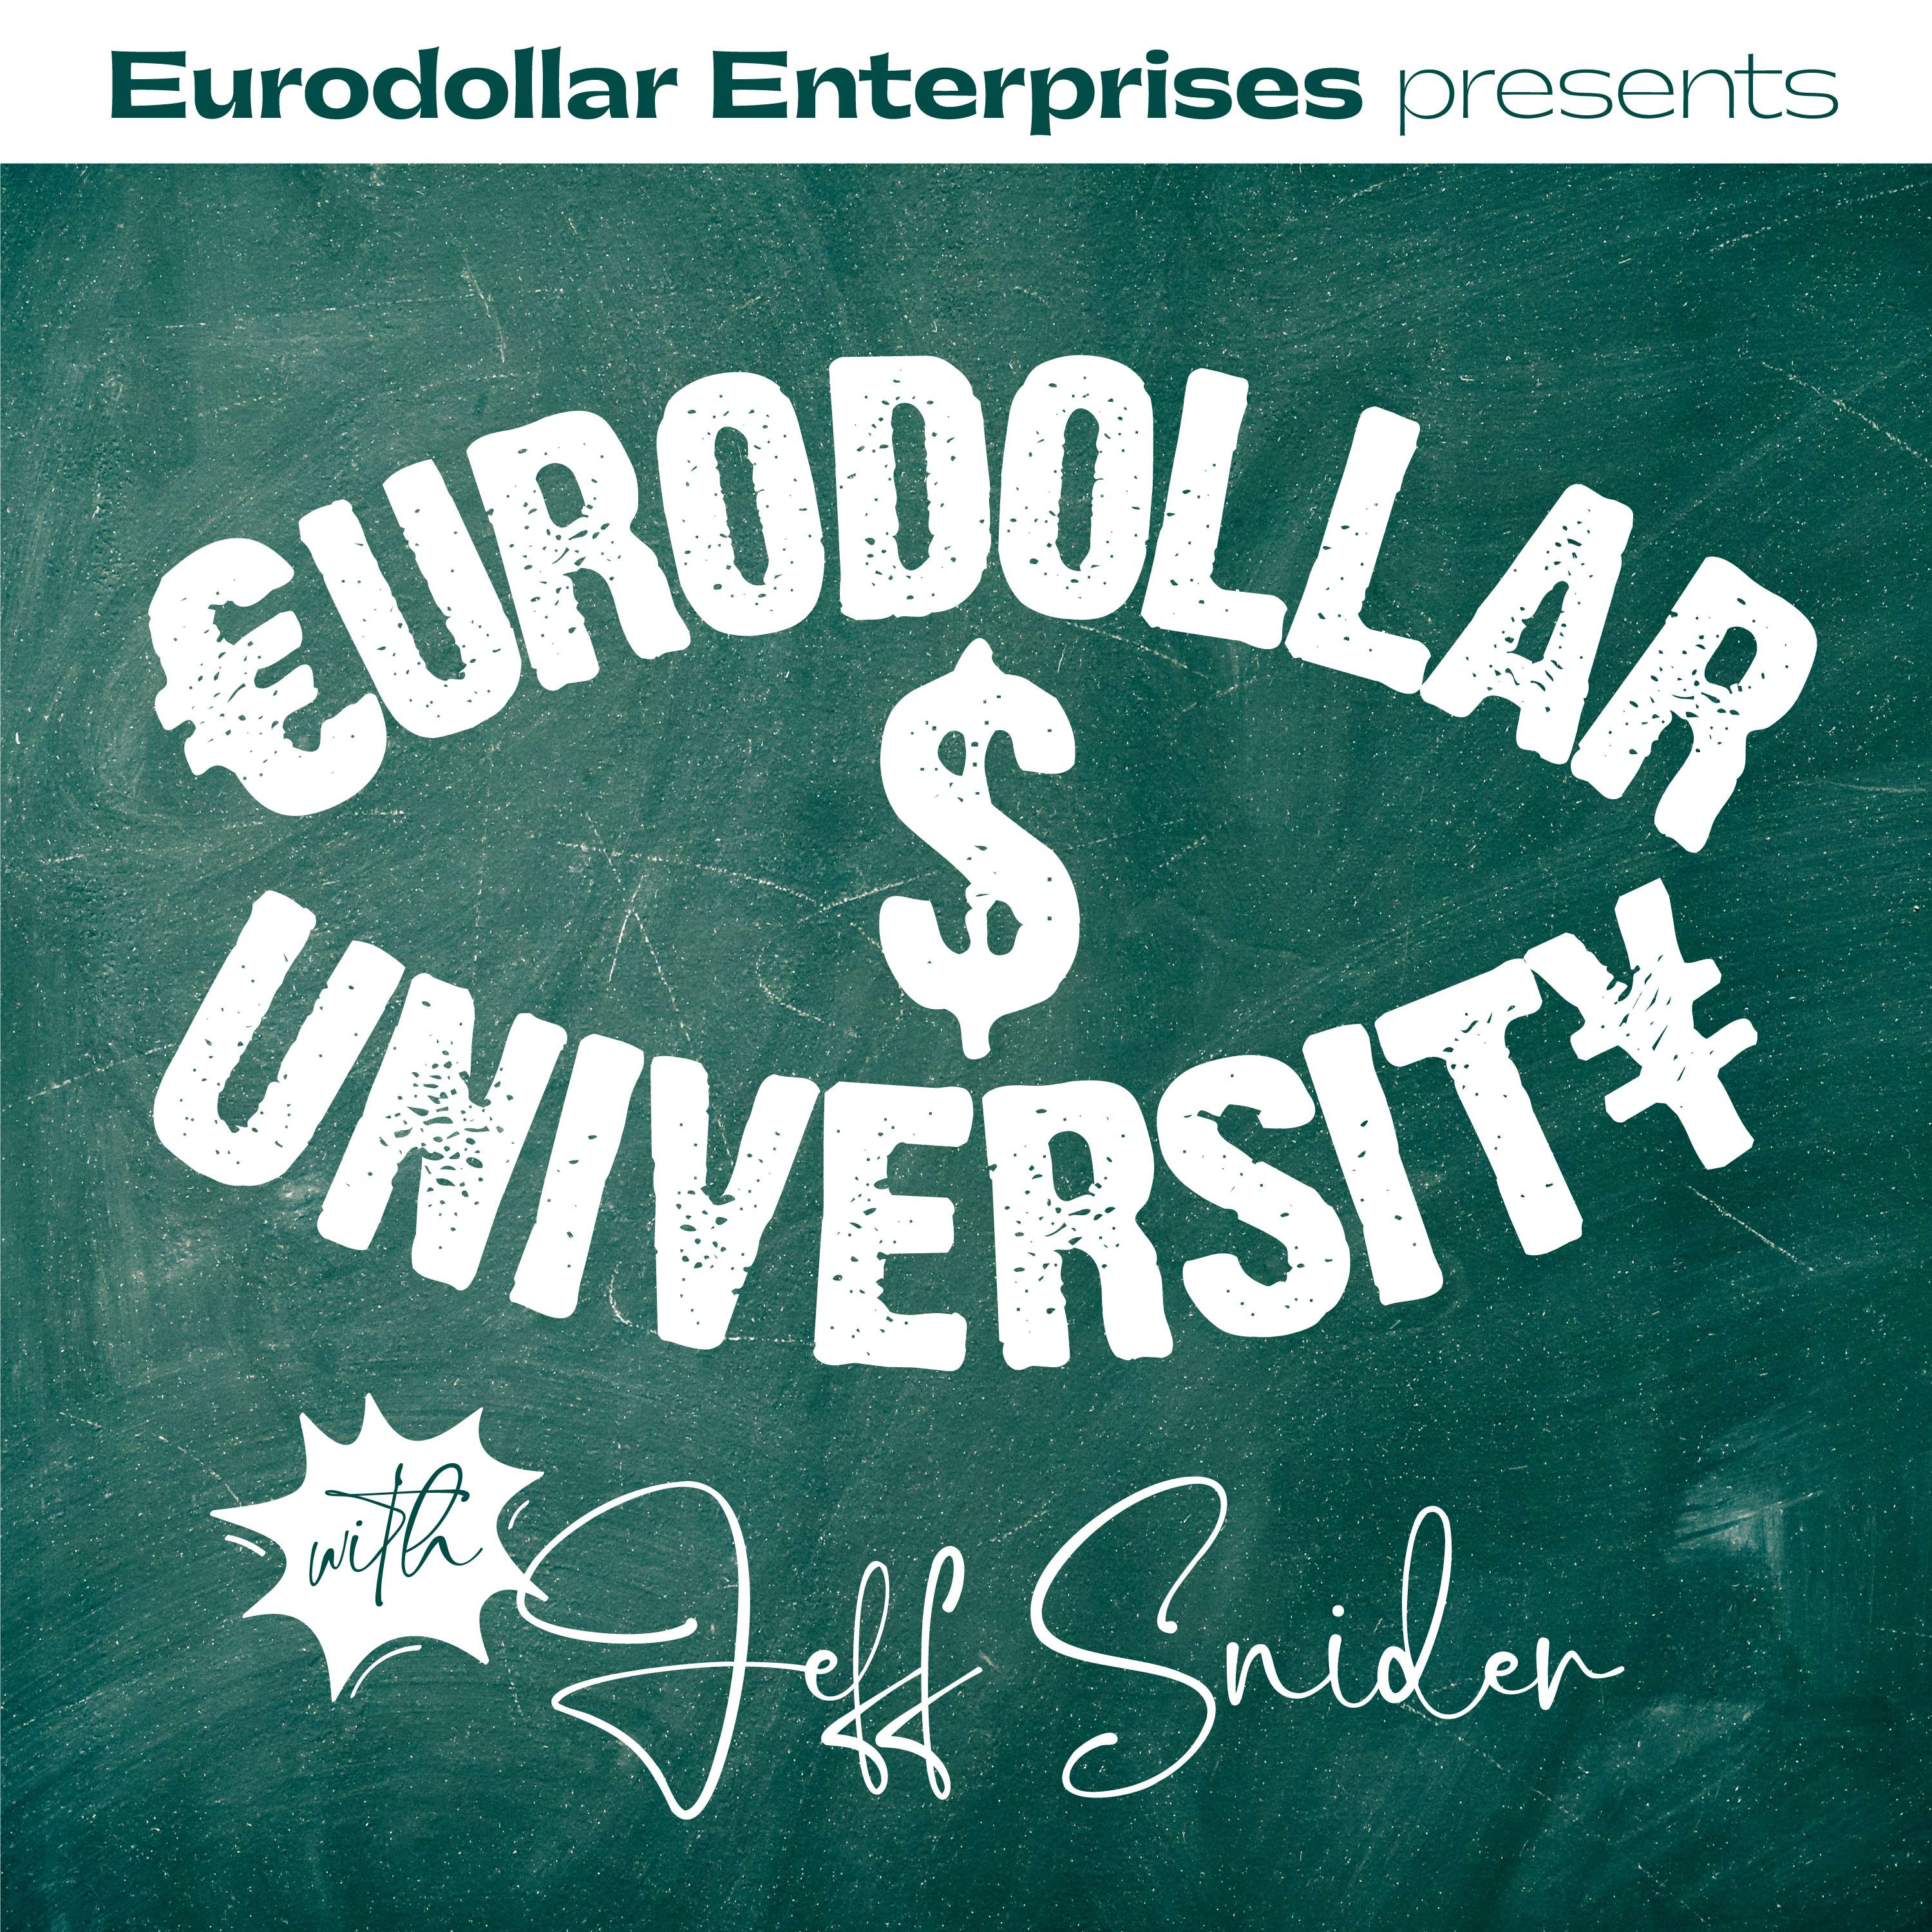 China's Currency (had been) Suspiciously Stable [Ep. 279, Eurodollar University]